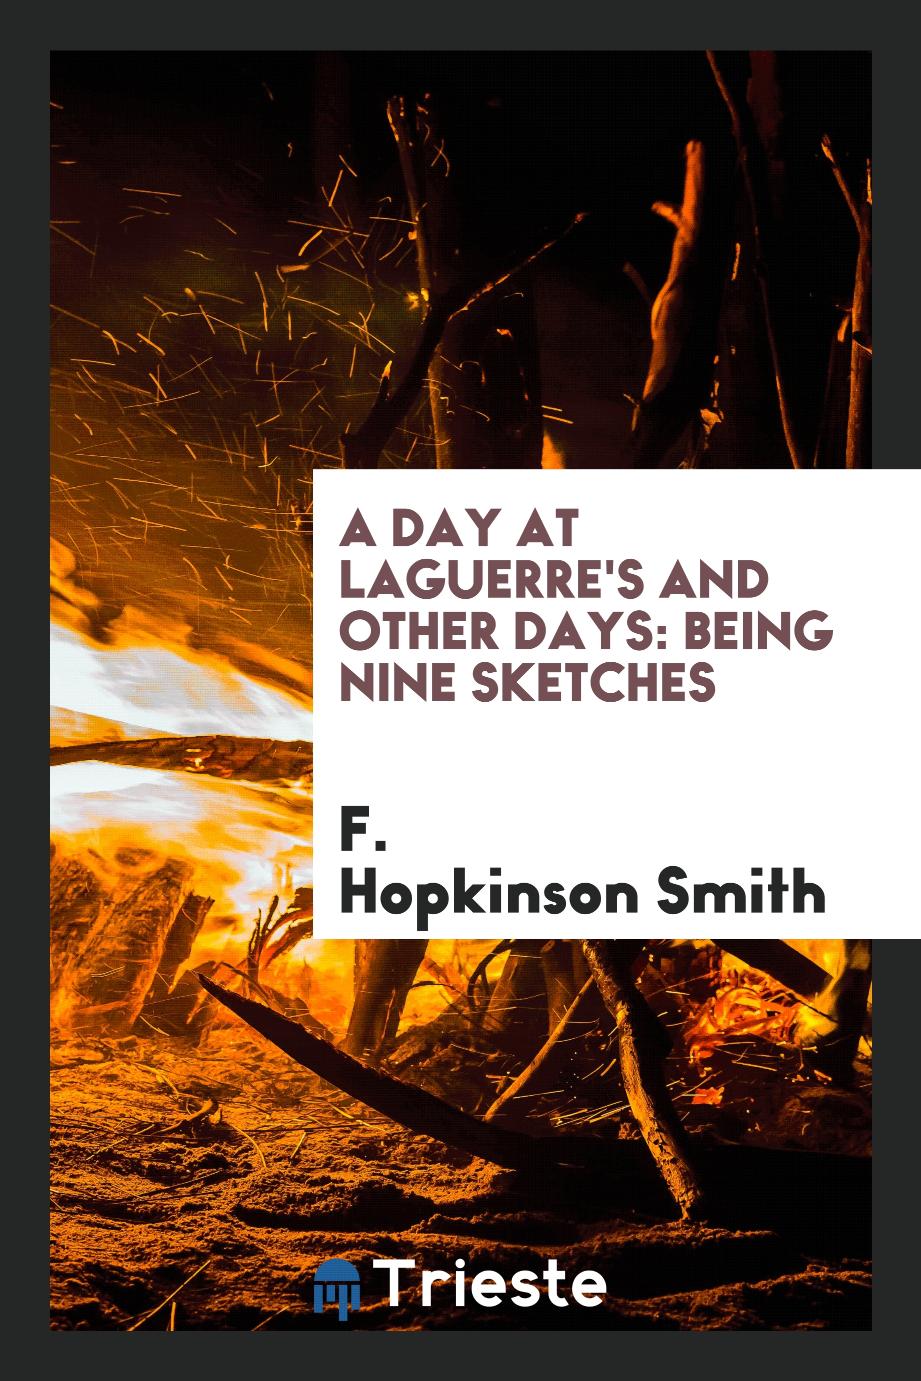 A Day at Laguerre's and Other Days: Being Nine Sketches